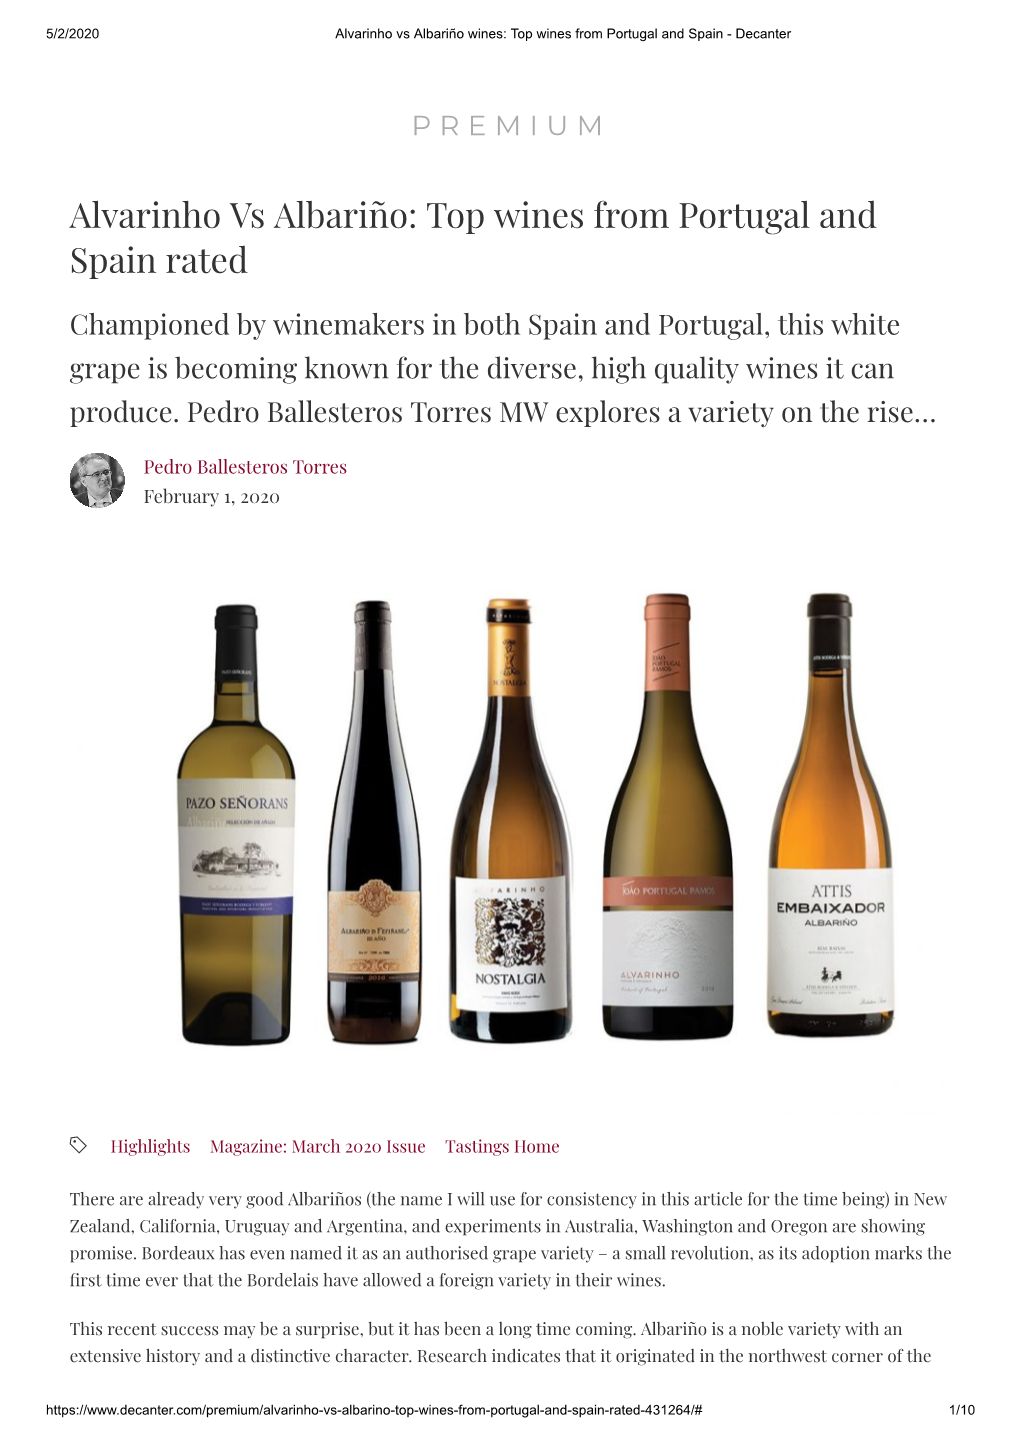 Alvarinho Vs Albariño: Top Wines from Portugal and Spain Rated